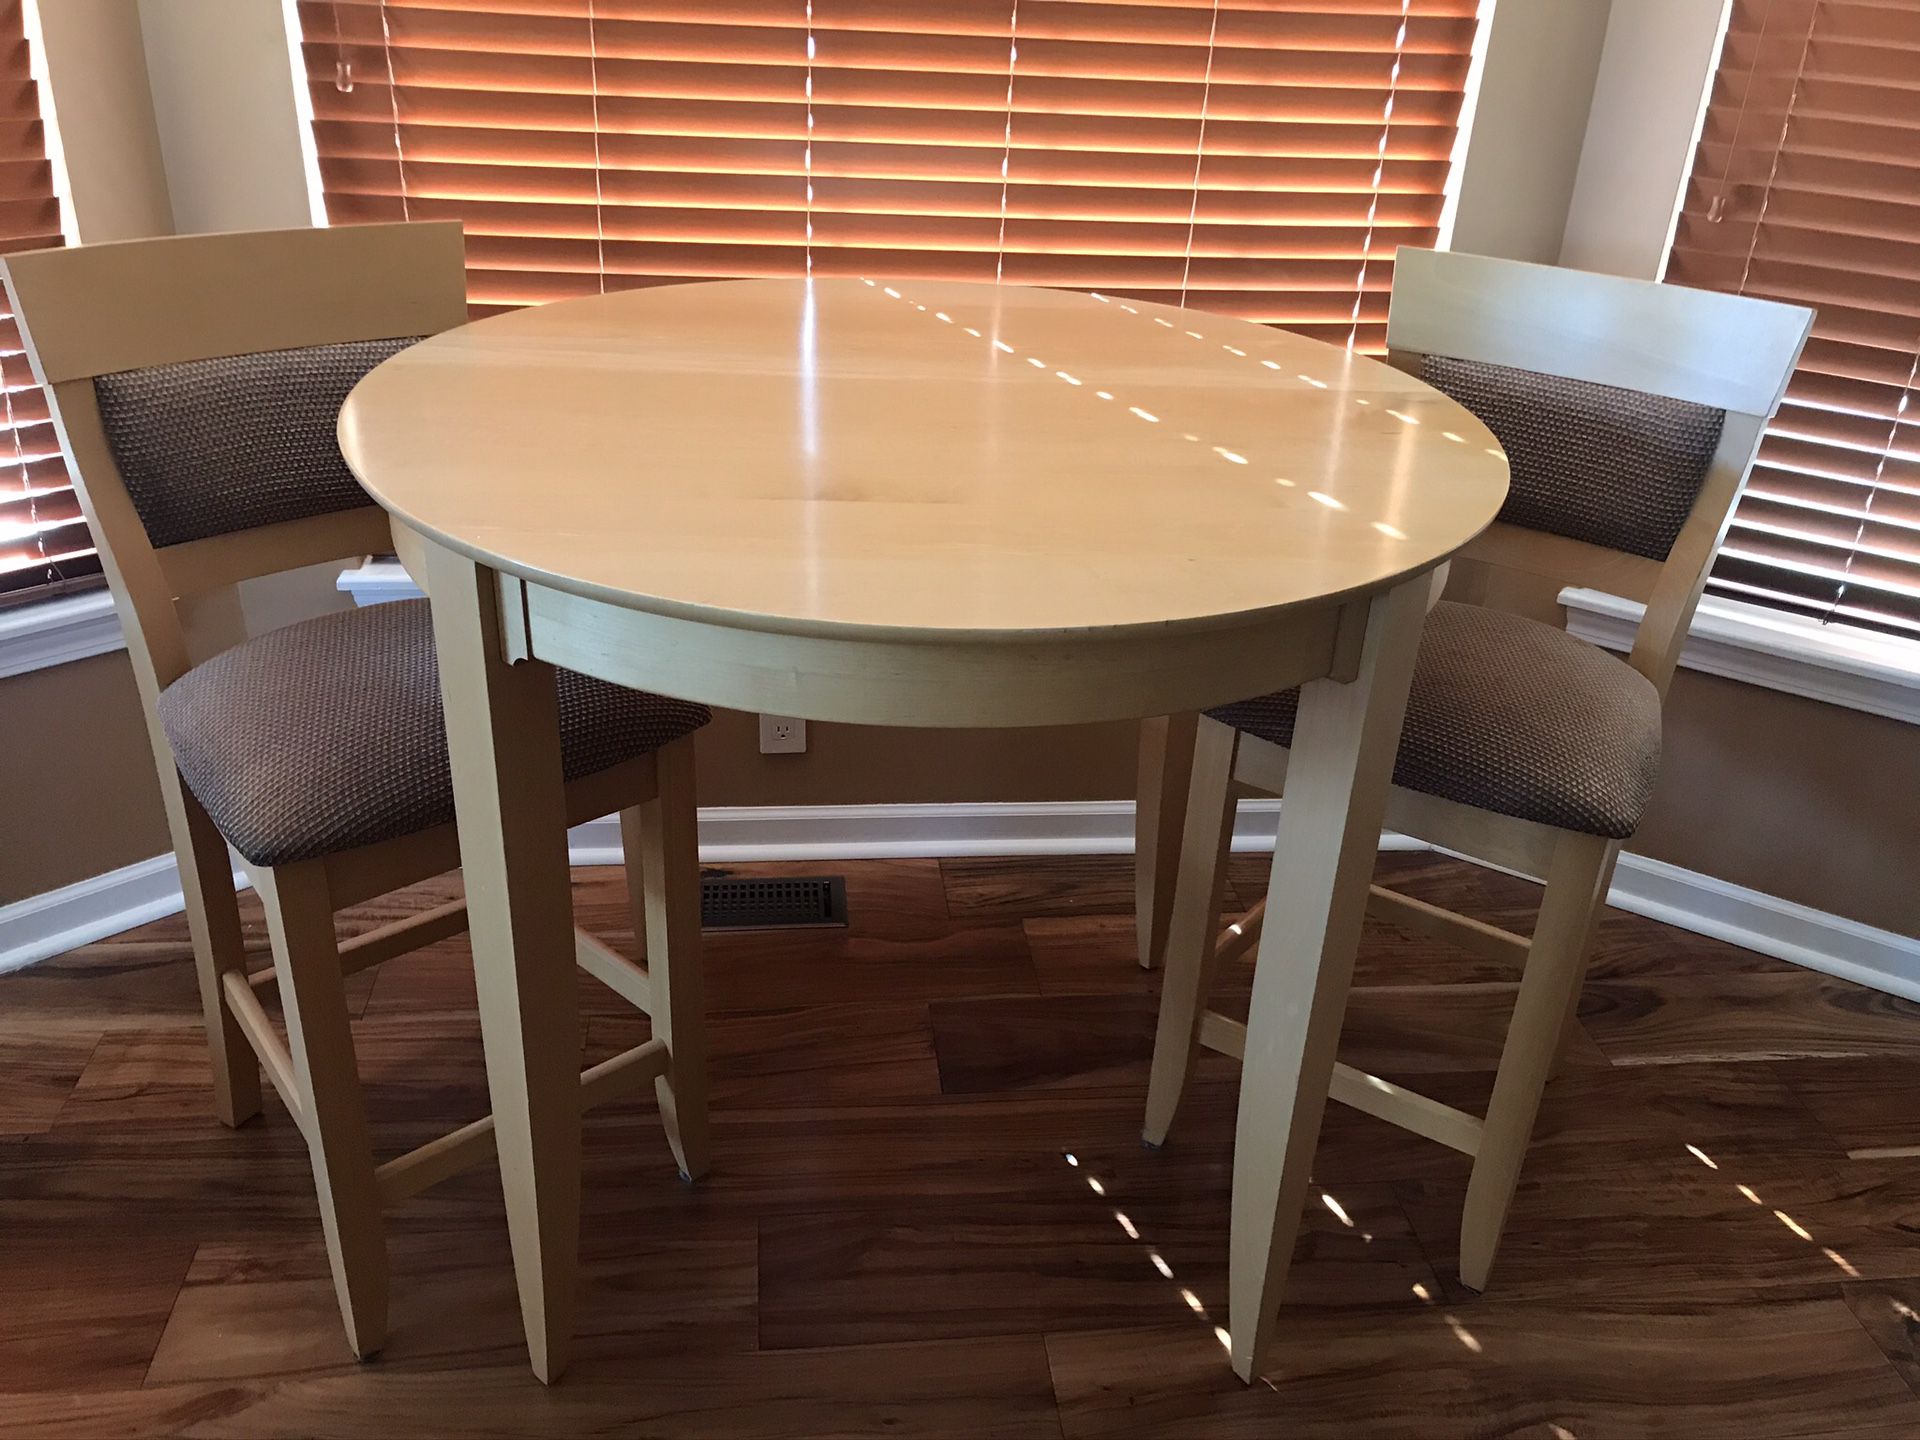 Round kitchen table and 2 chairs. Pub height. Excellent quality - solid Maple